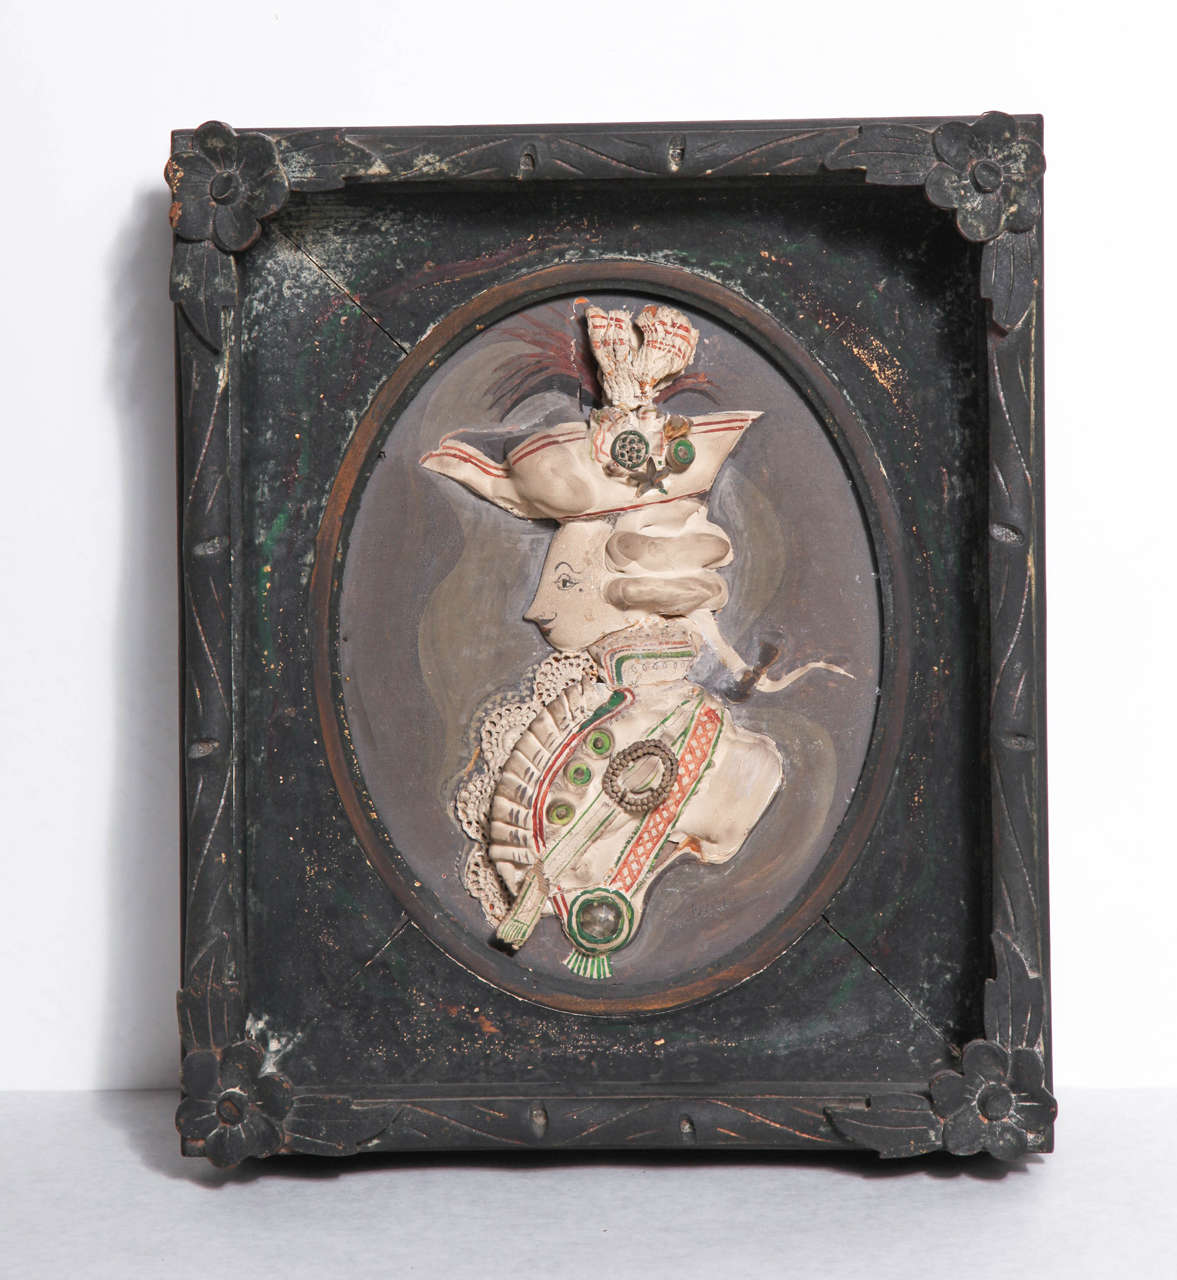 Whimsical signed assemblage by American artist and designer Tony Duquette (1914–1999). Unusual found materials employed including plaster-dipped doilies, ribbon, and rope and enclosed by a period frame Duquette ebonized and embellished with glitter.